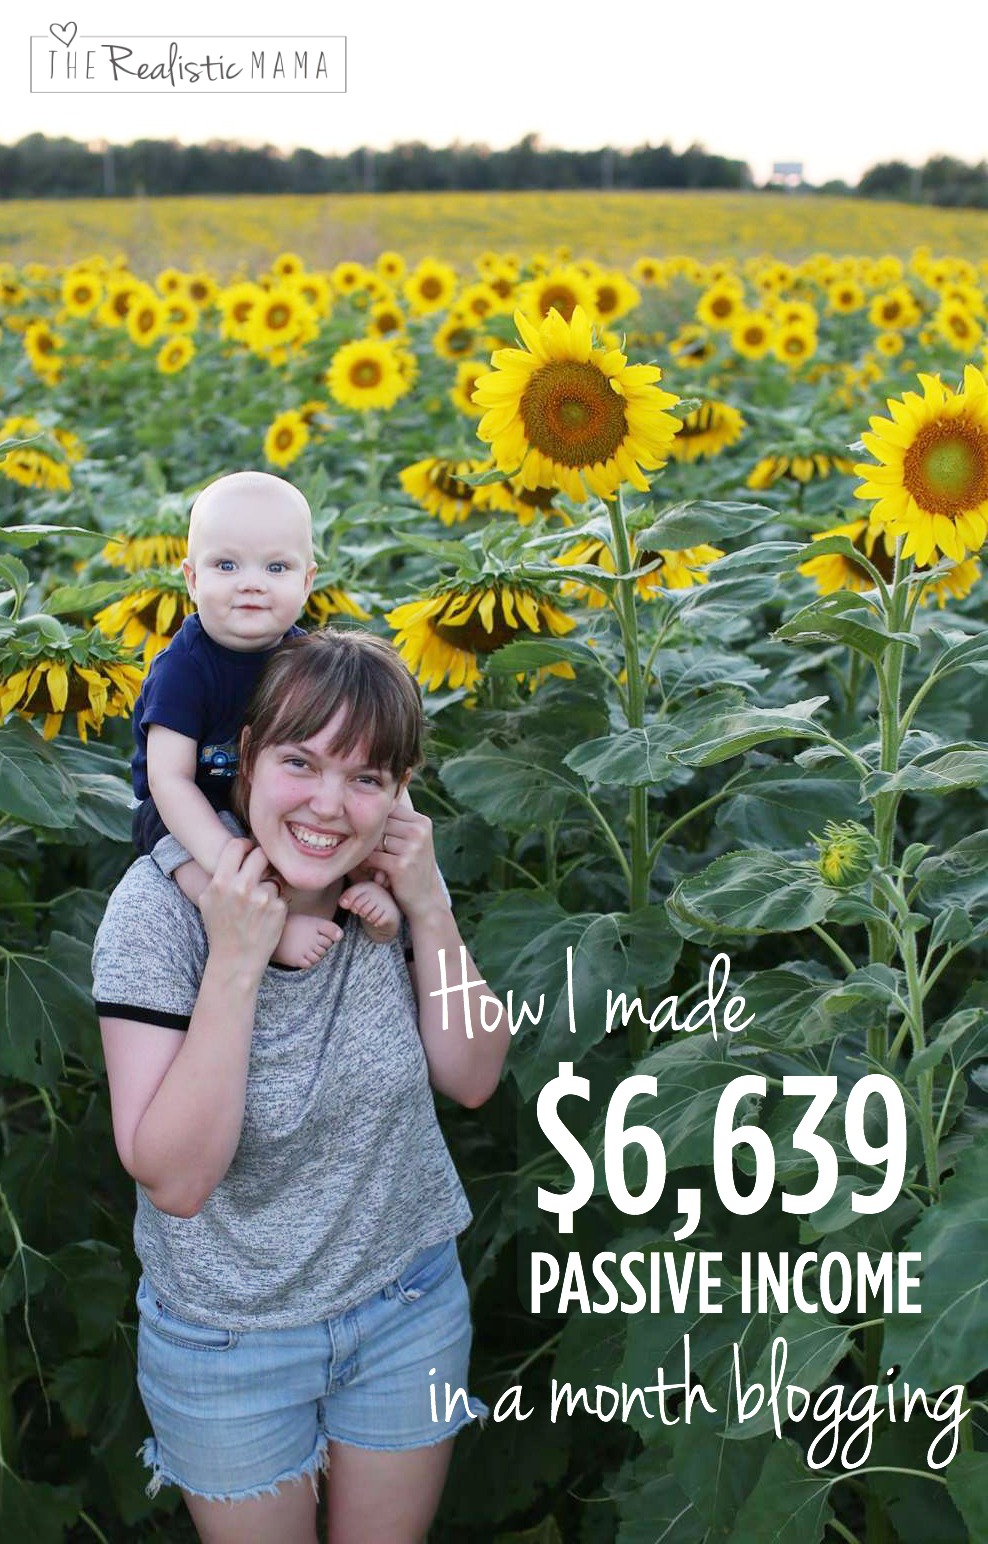 How I made $6,639 passive income in a month blogging